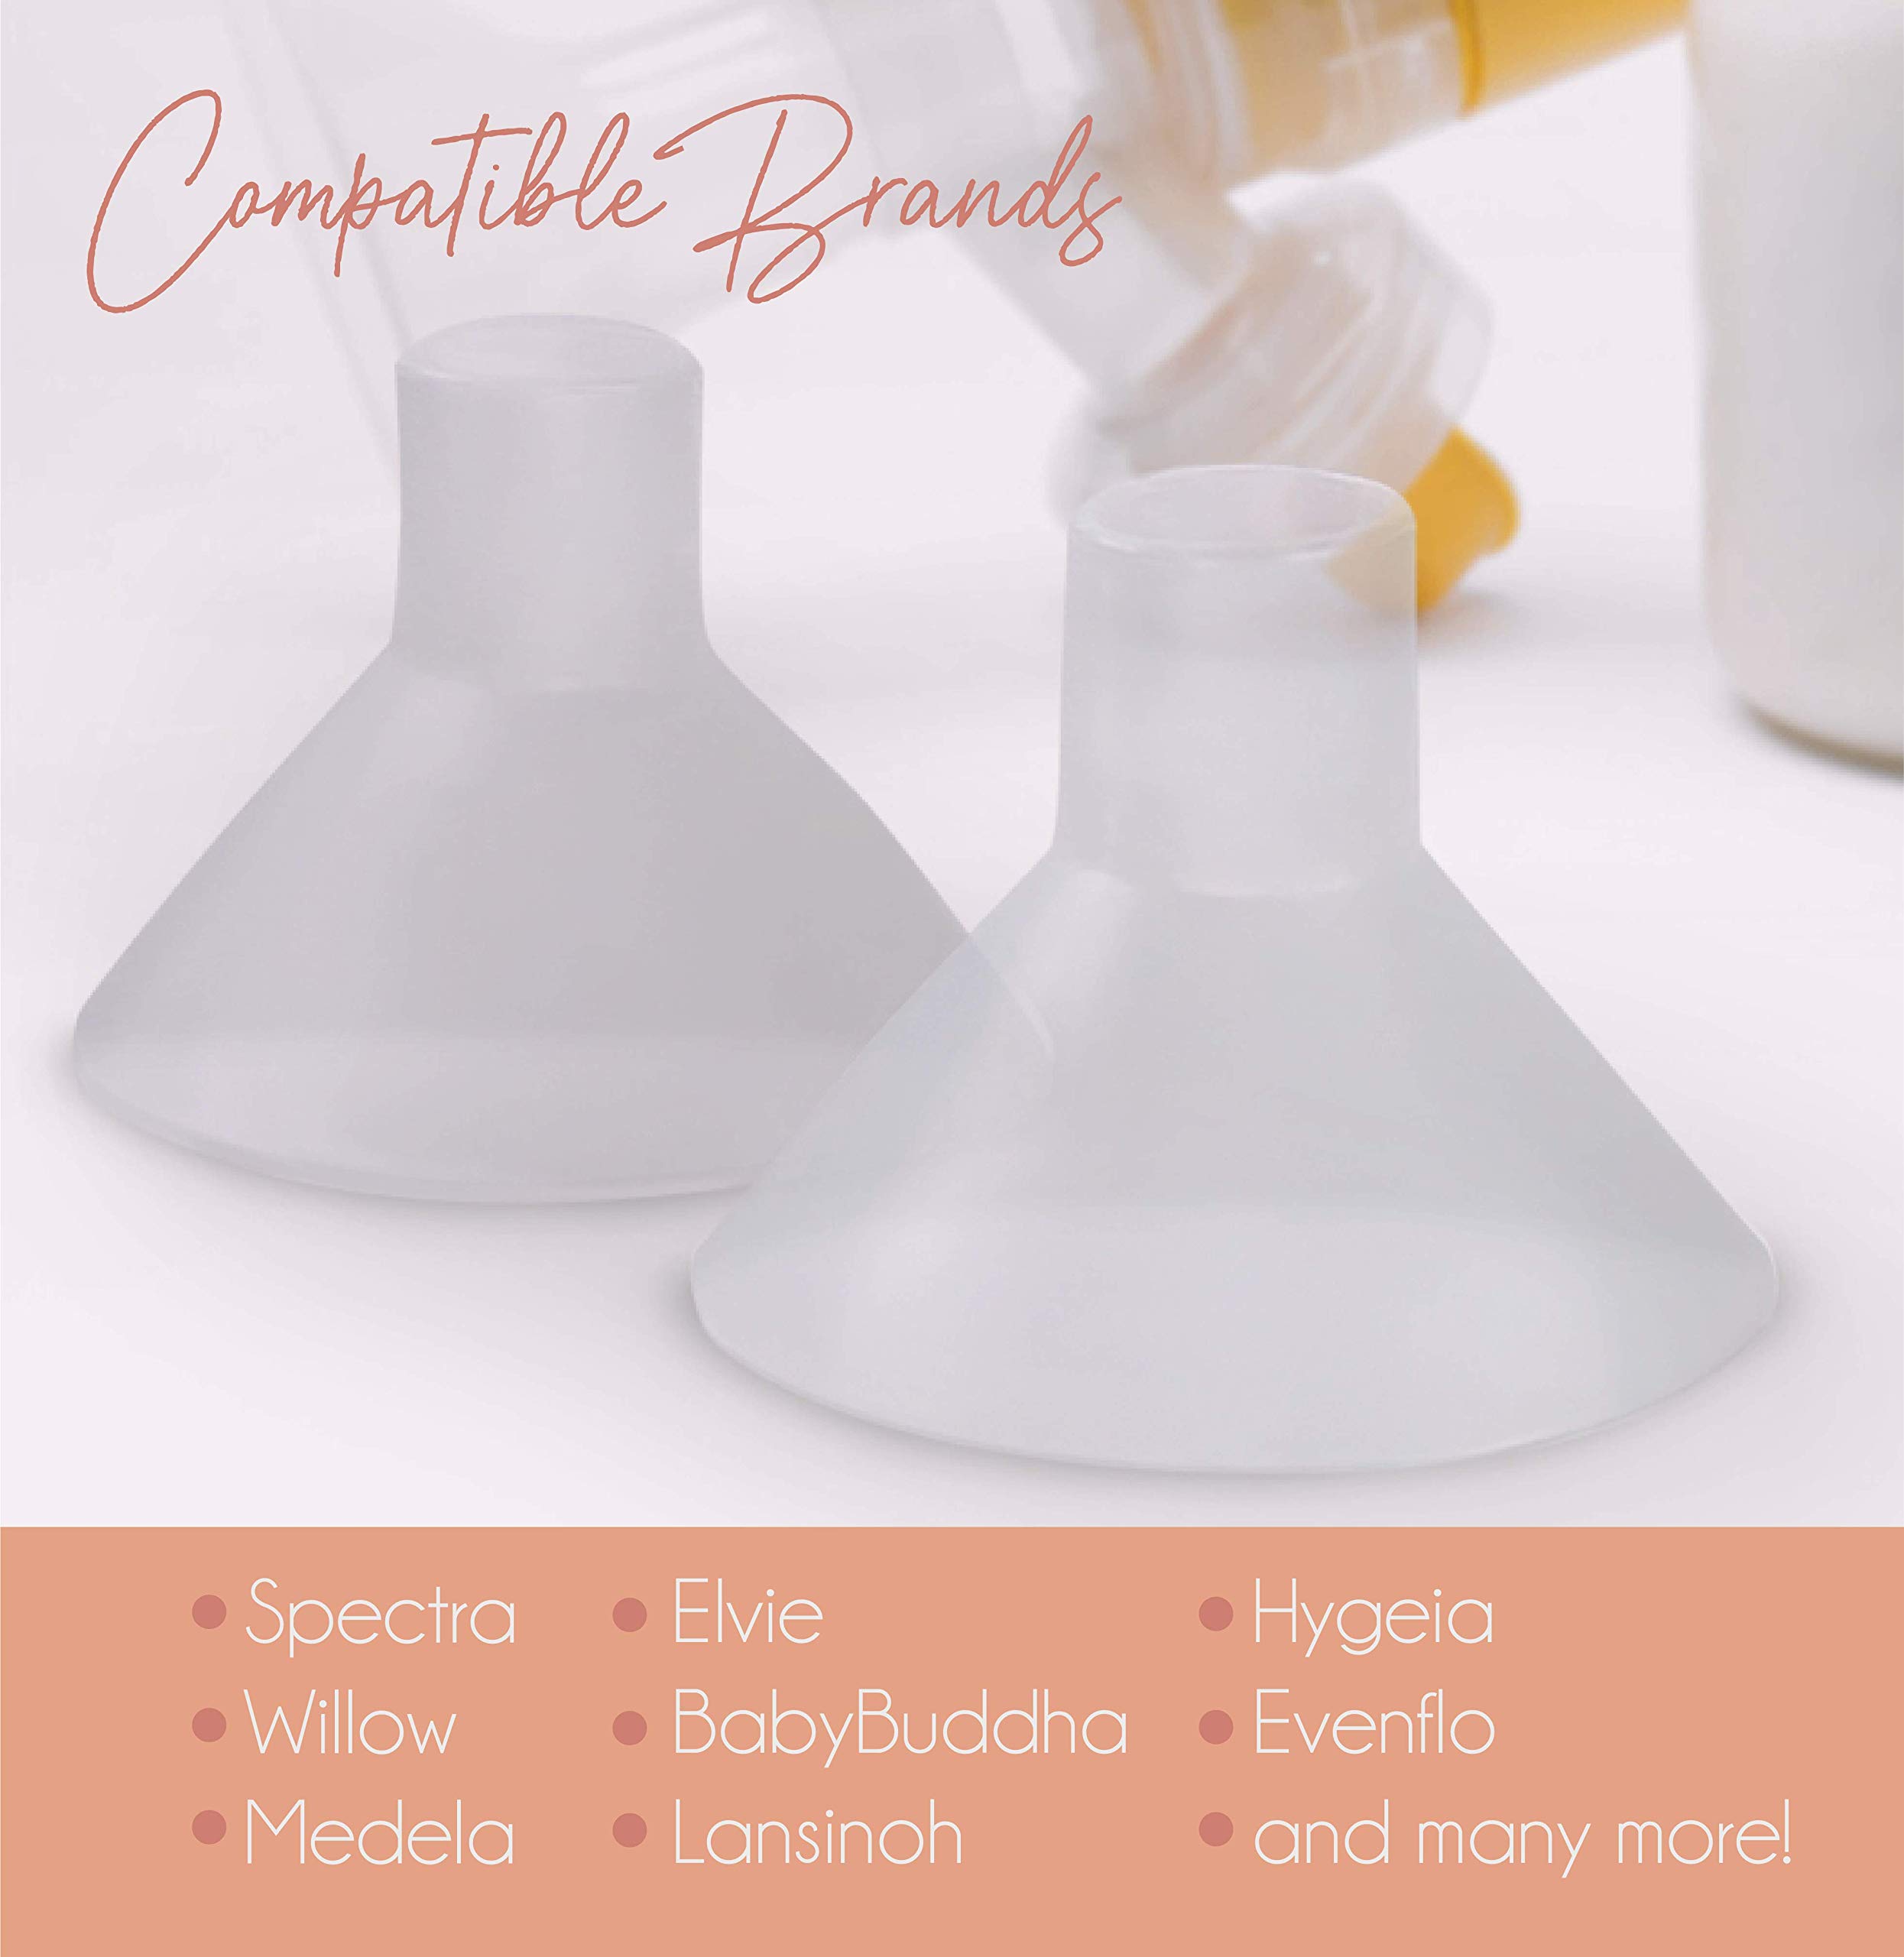 BeauGen Clearly Comfy Breast Pump Cushion – Soft, Stretchy, Clear, and Comfortable Flange Inserts for Improved Comfort and Fit – BPA Free, Food Safe Plastic (1 Pair)